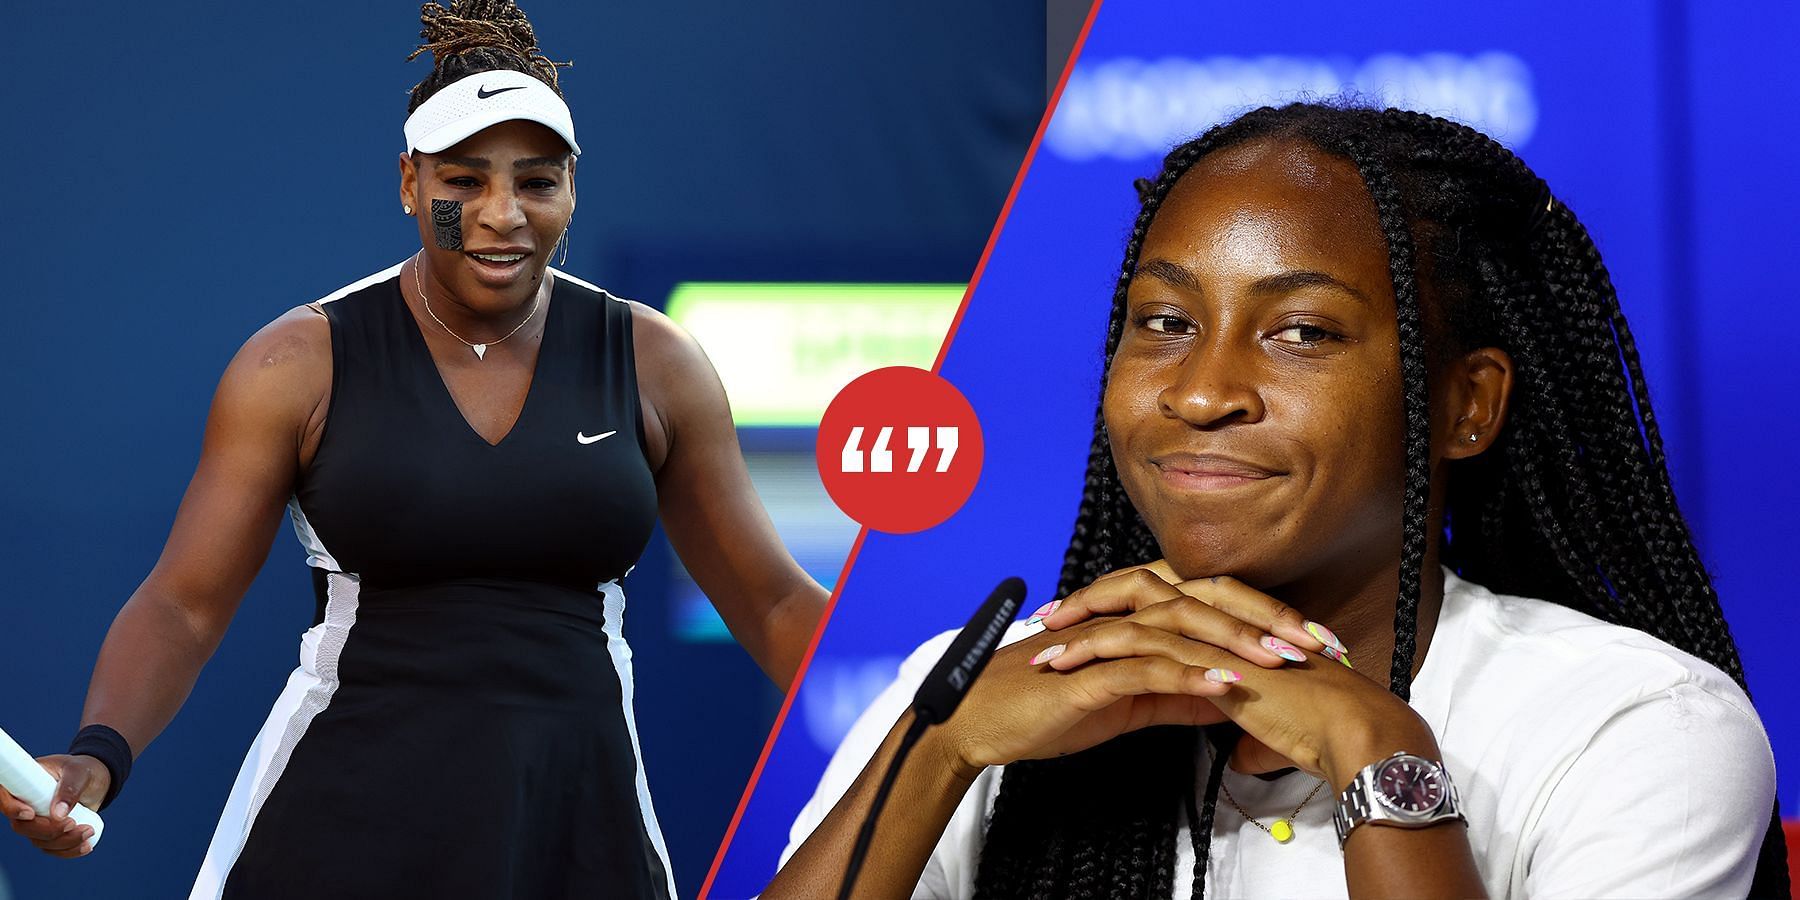 Coco Gauff fields questions, including those about Serena Williams, during US Open&#039;s Media Day.